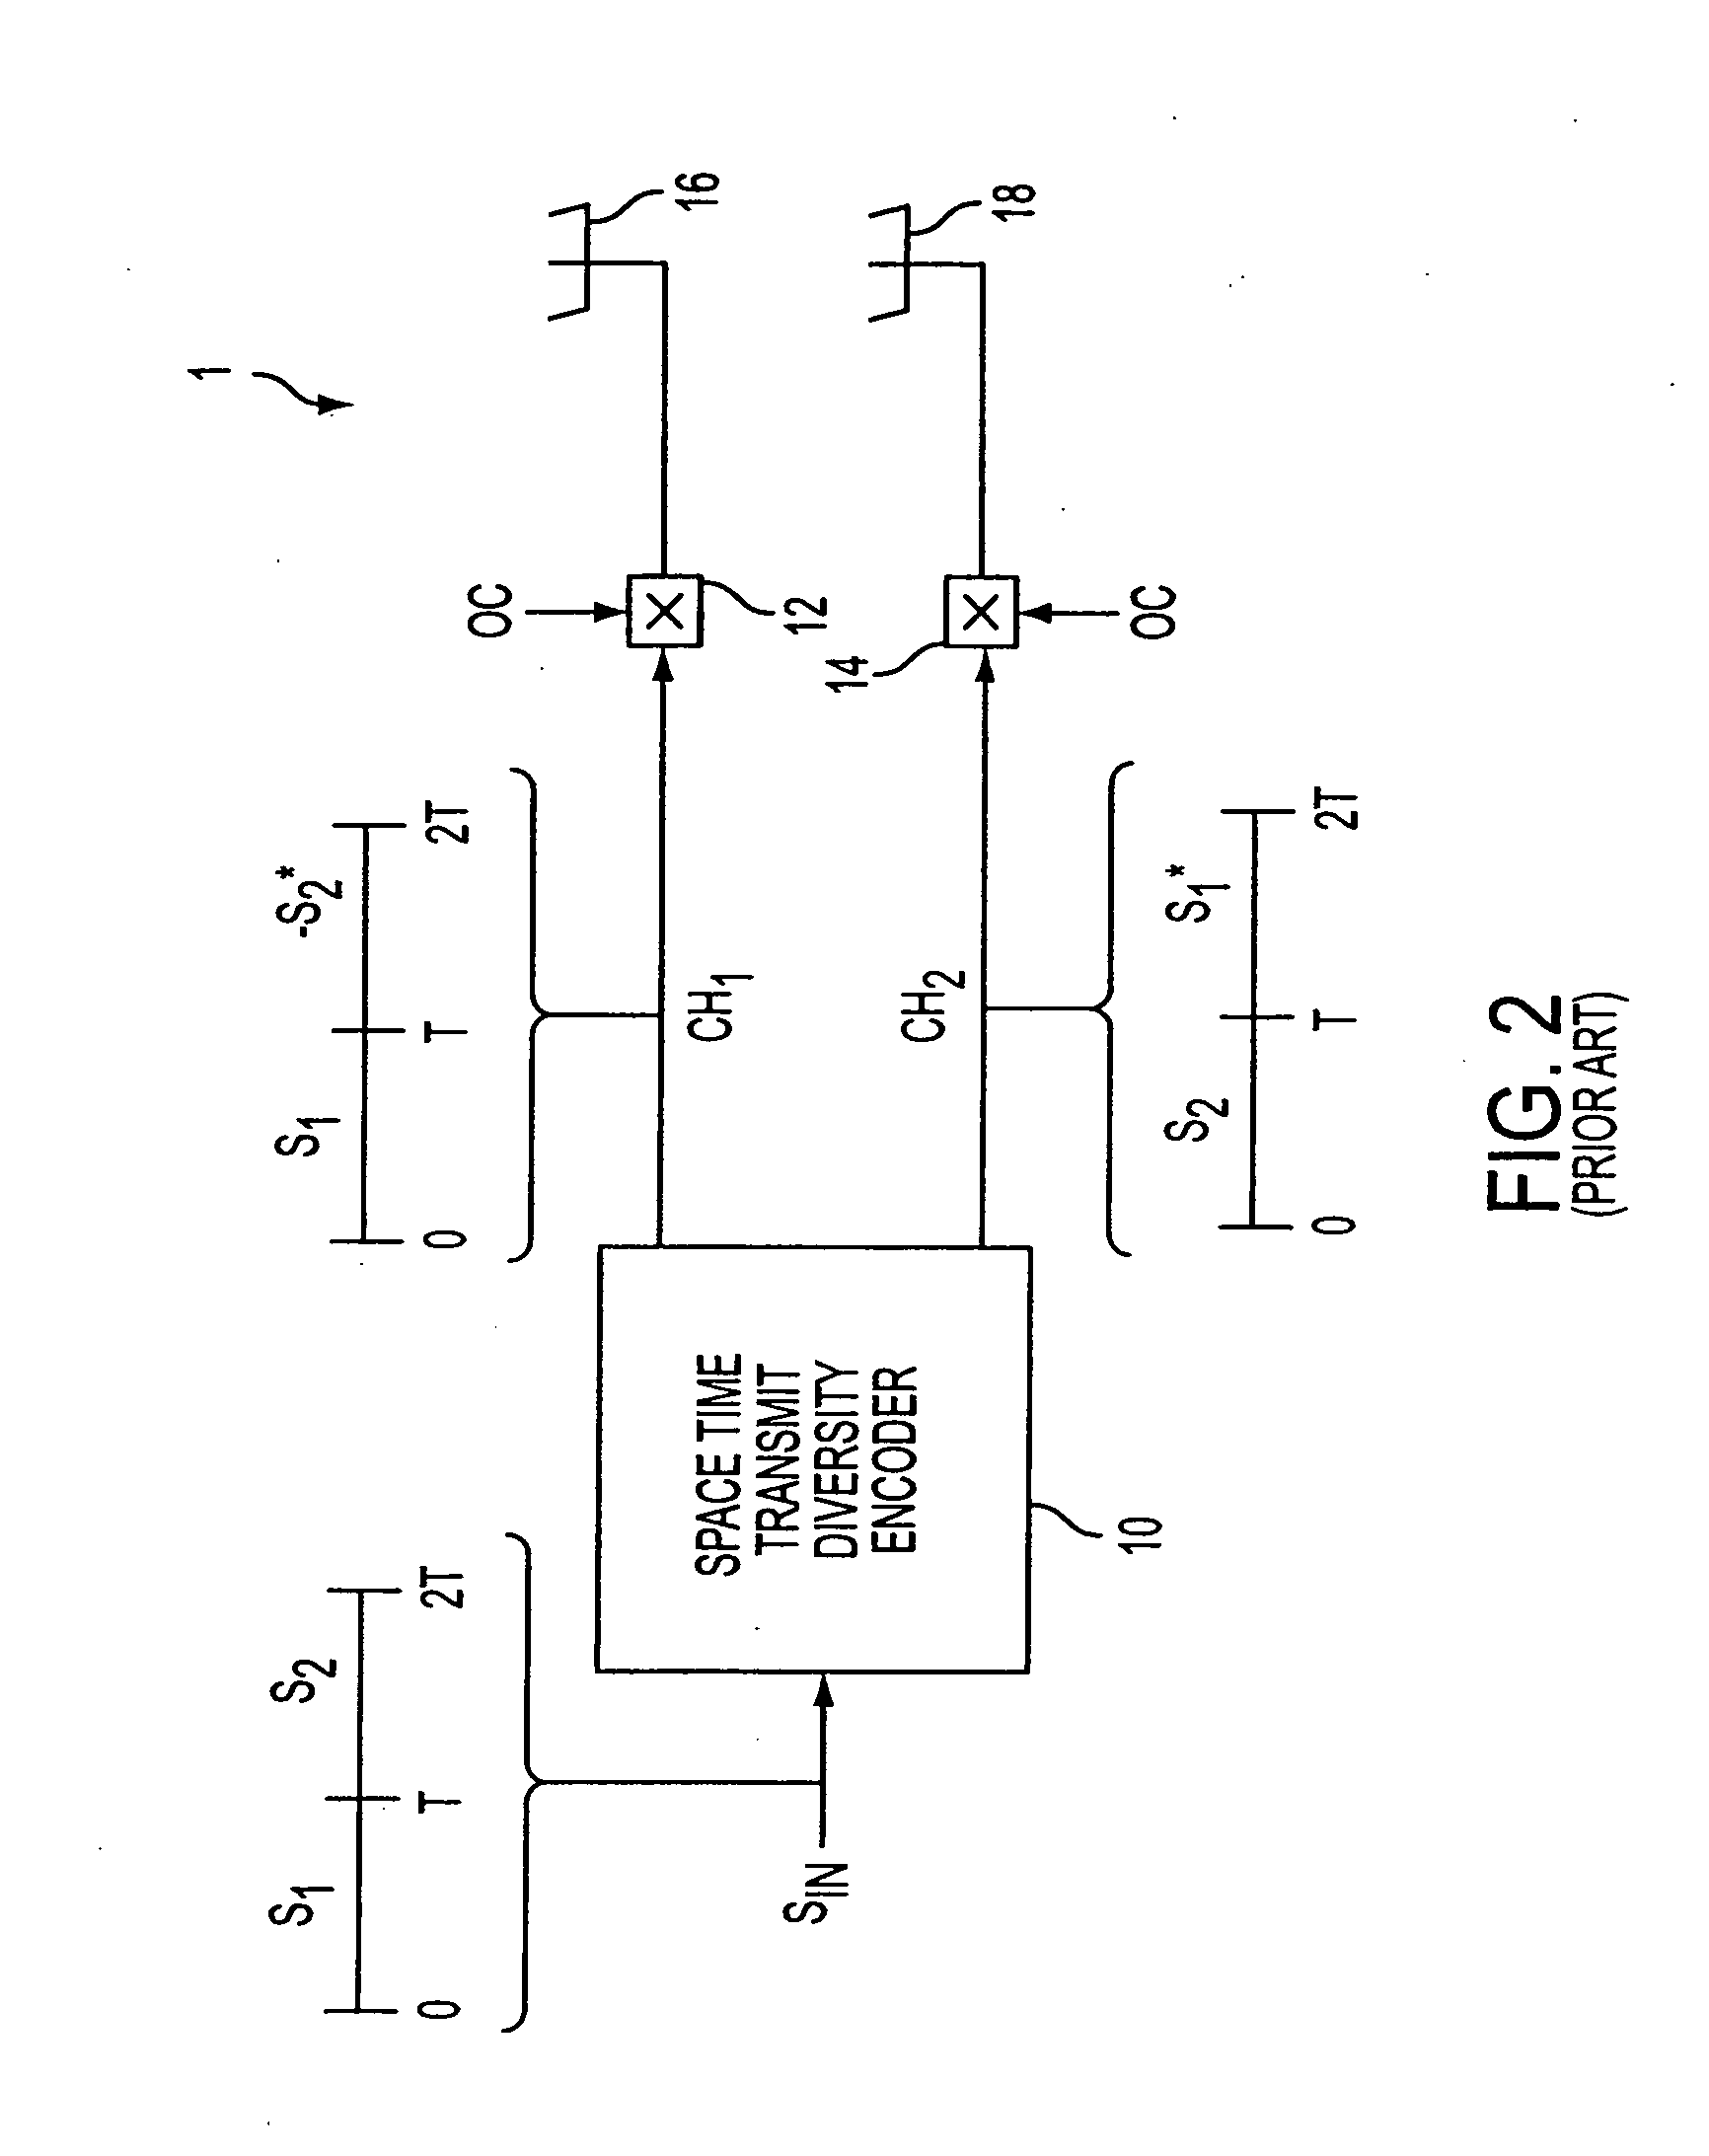 Closed loop feedback system for improved down link performance